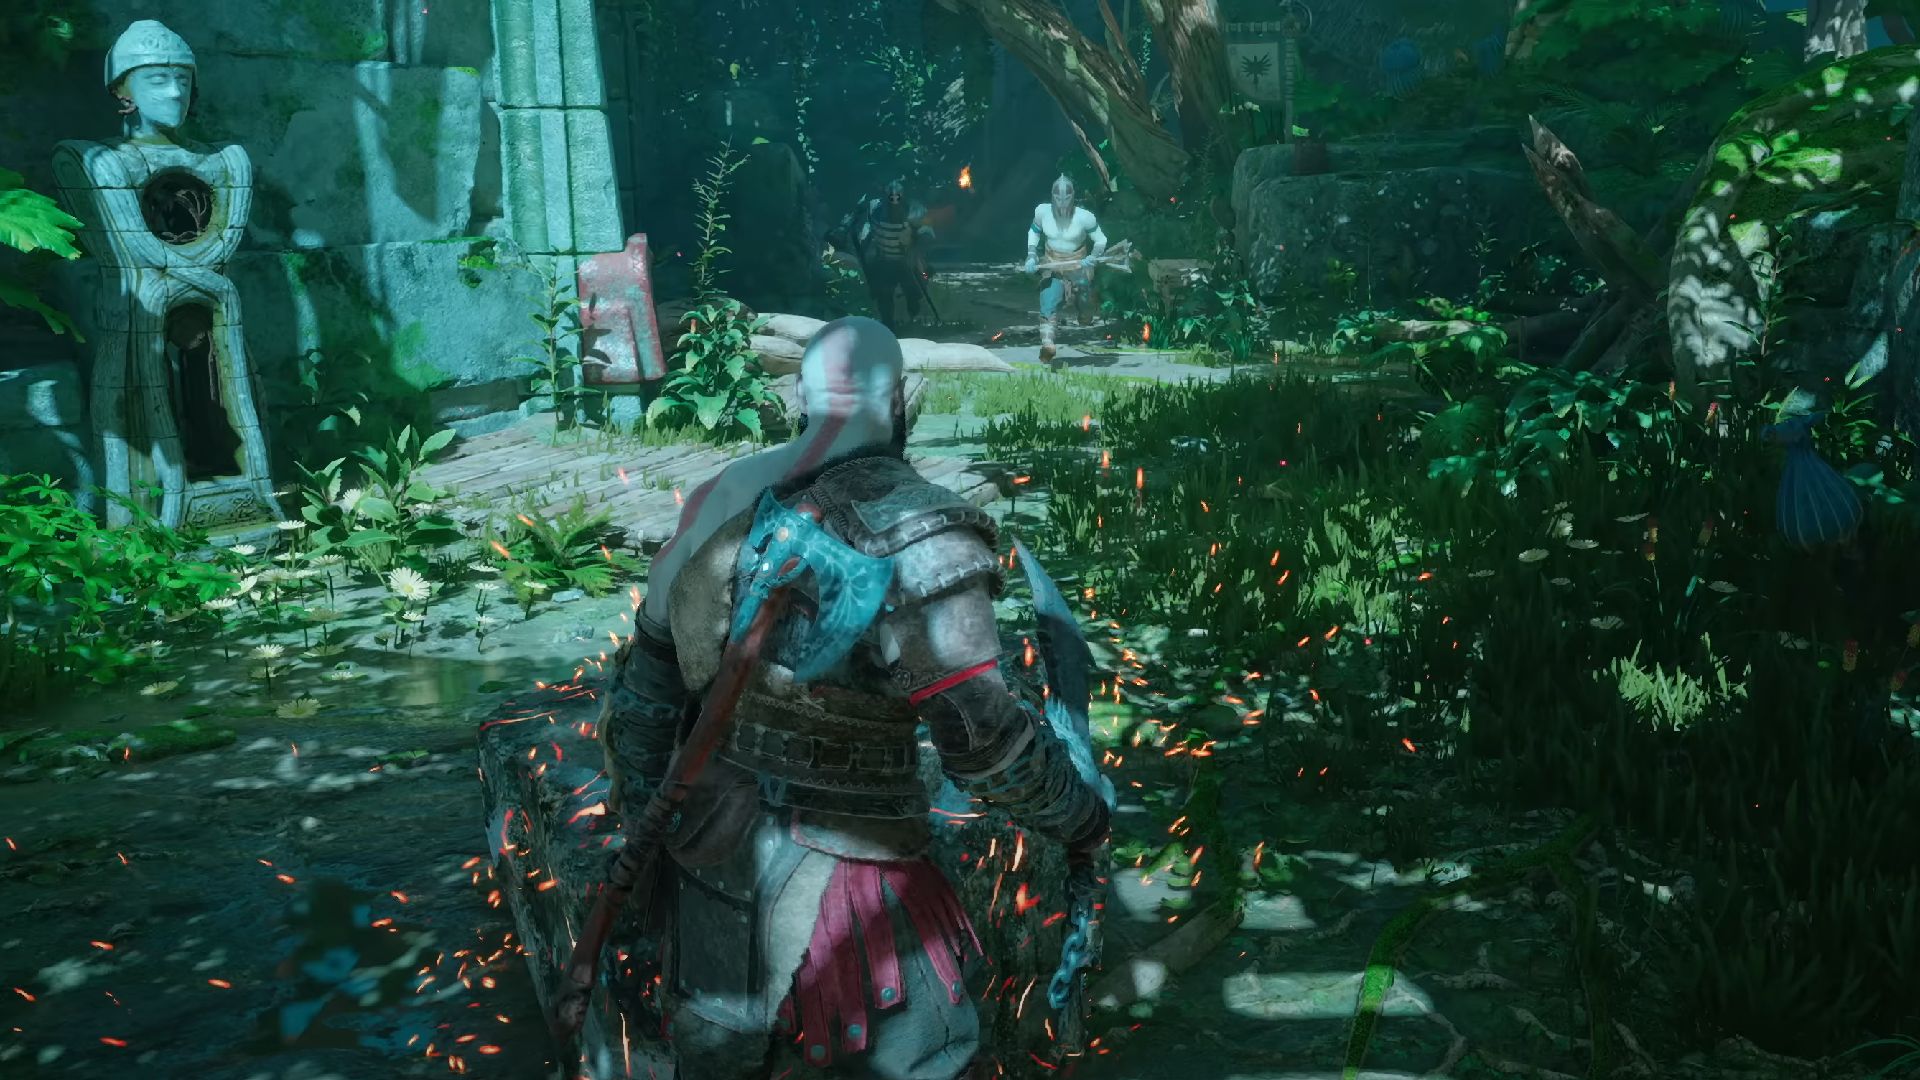 God of War Ragnarok Weapons: Kratos can be seen holding the Blades of Chaos